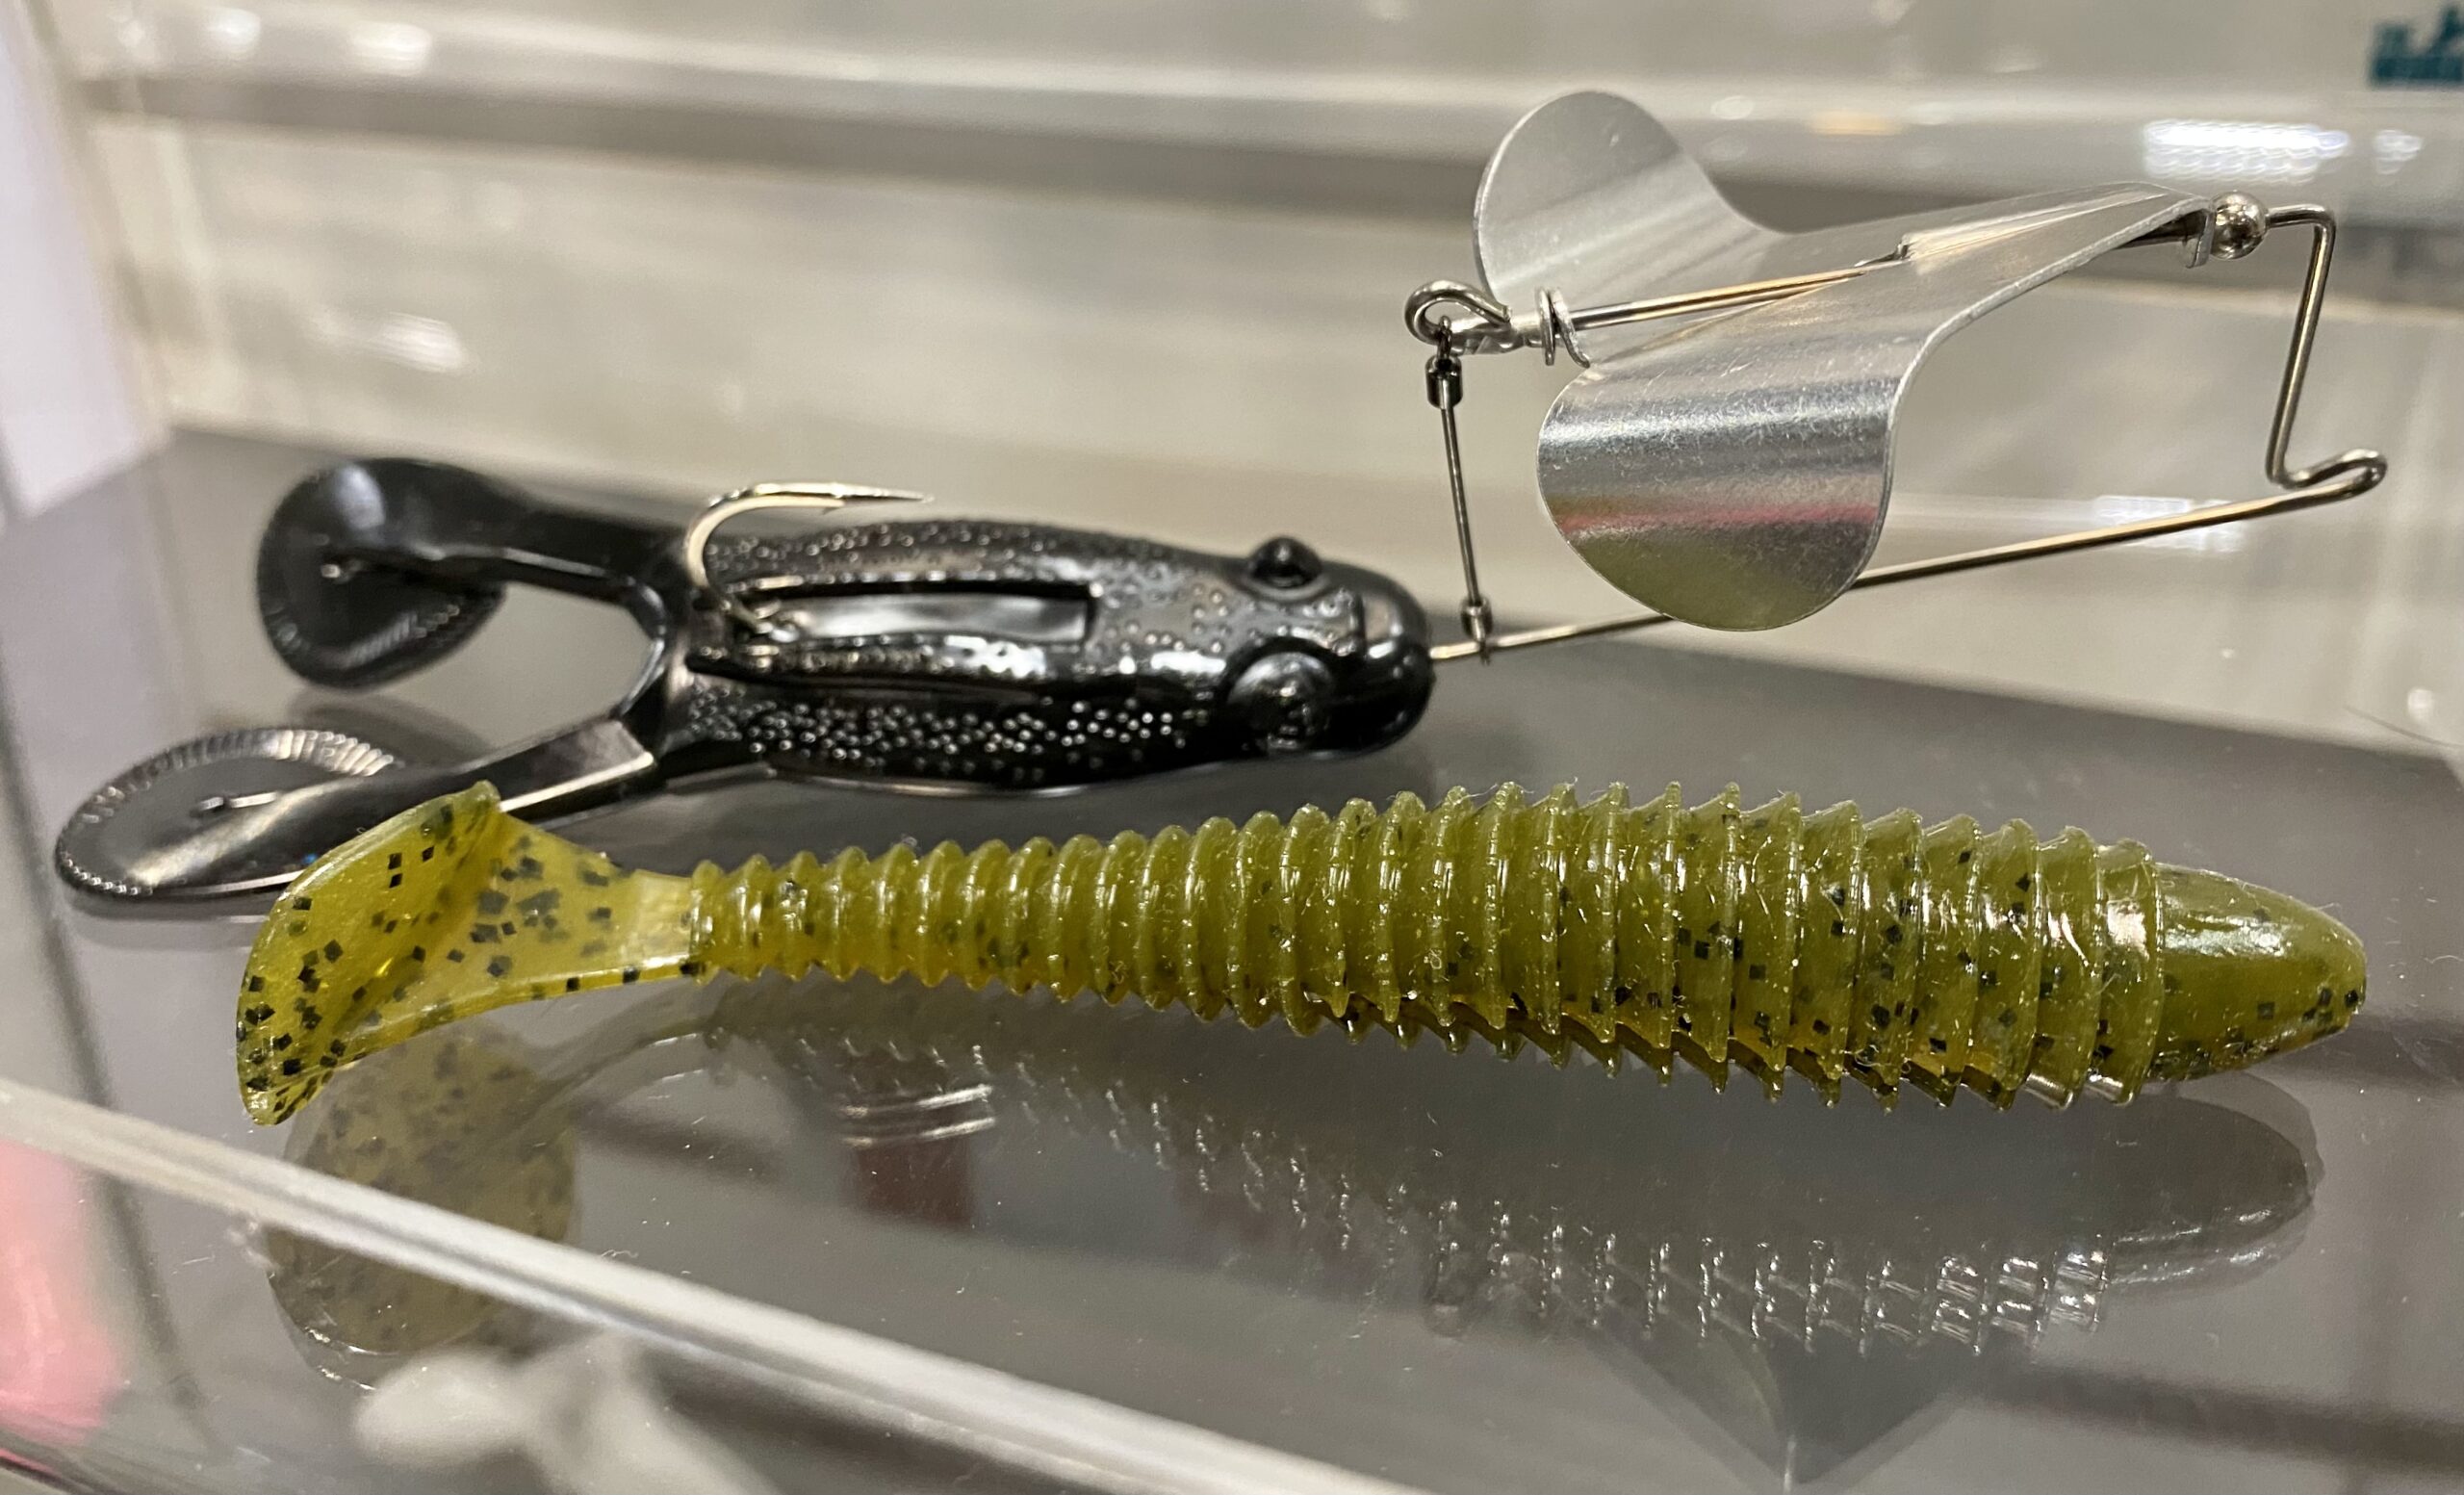 ICAST 2021: Best New Lures